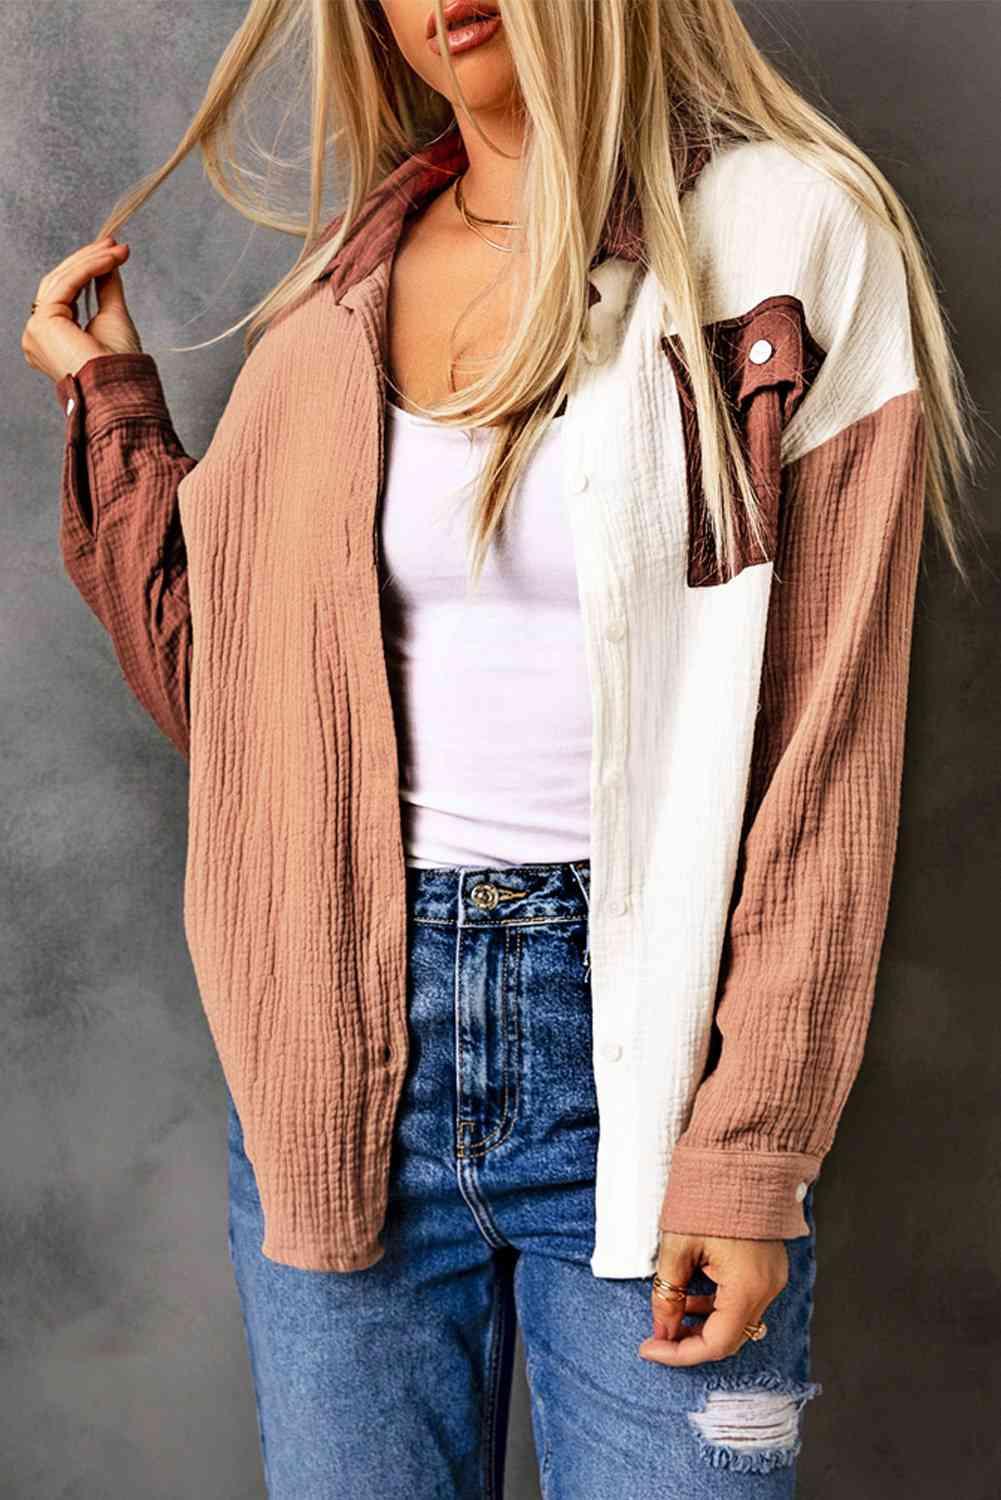 a woman with long hair wearing a jacket and jeans